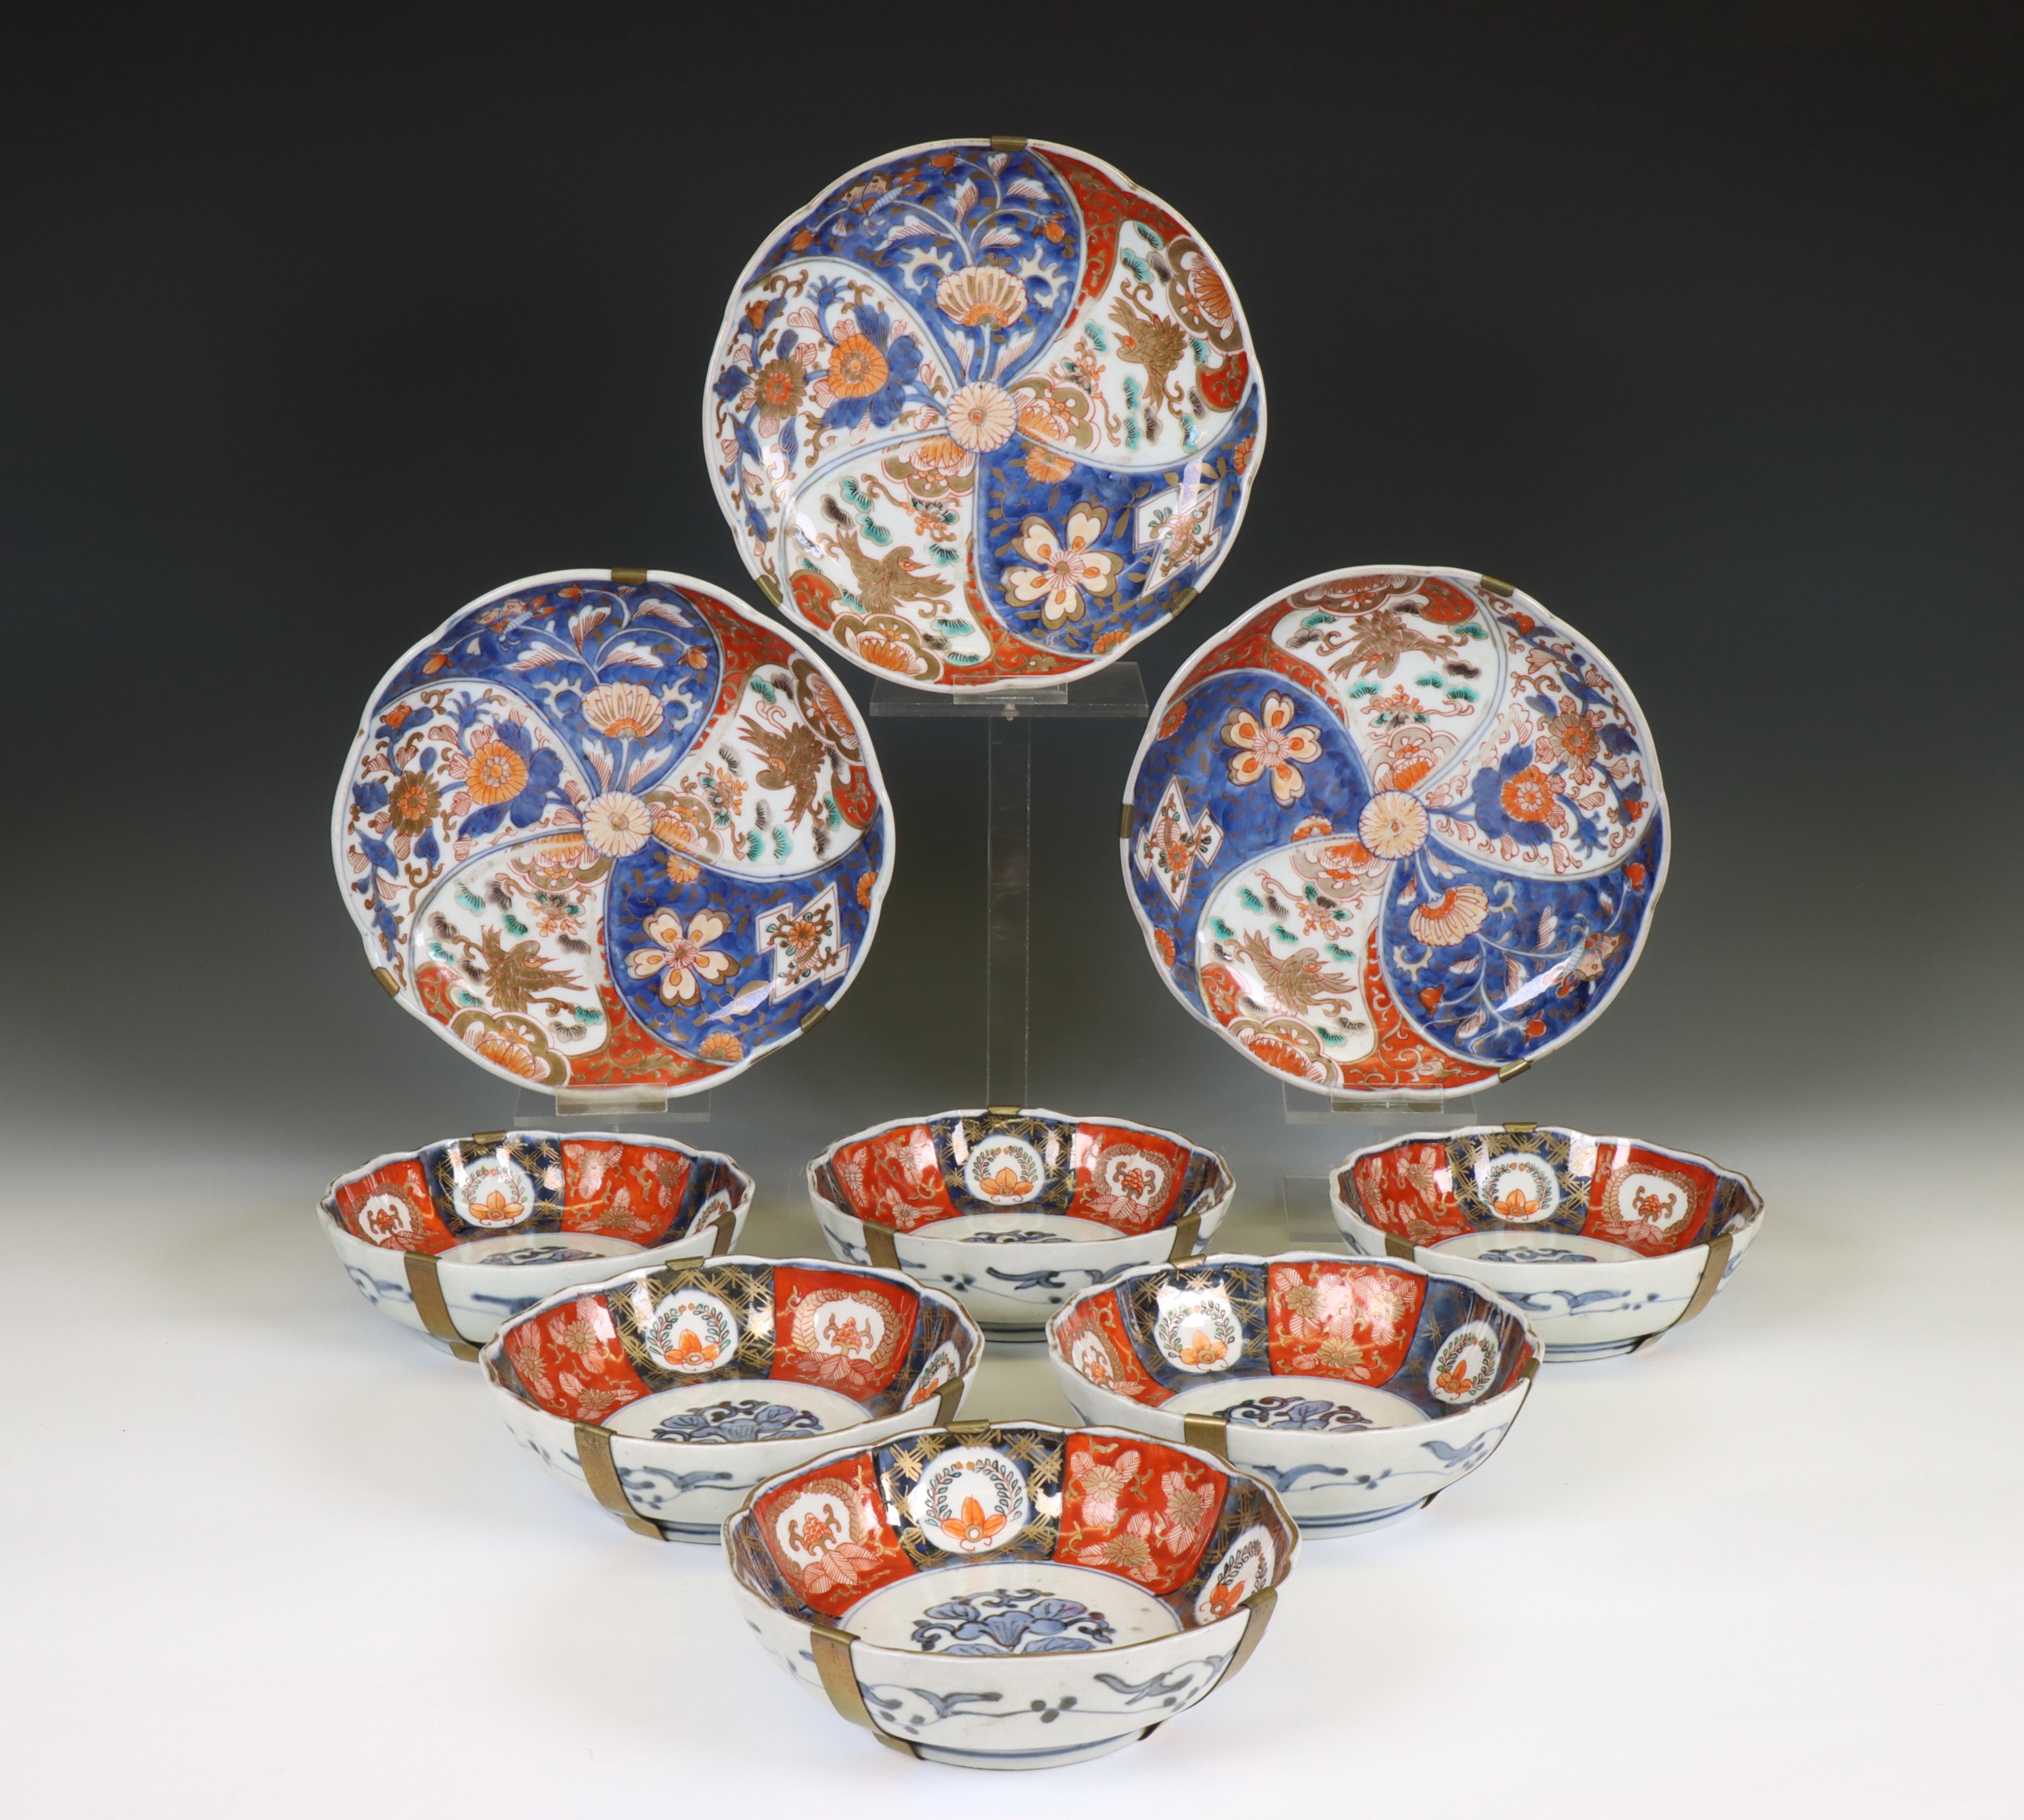 Japan, two sets of Imari dishes, Meiji period (1868-1912),